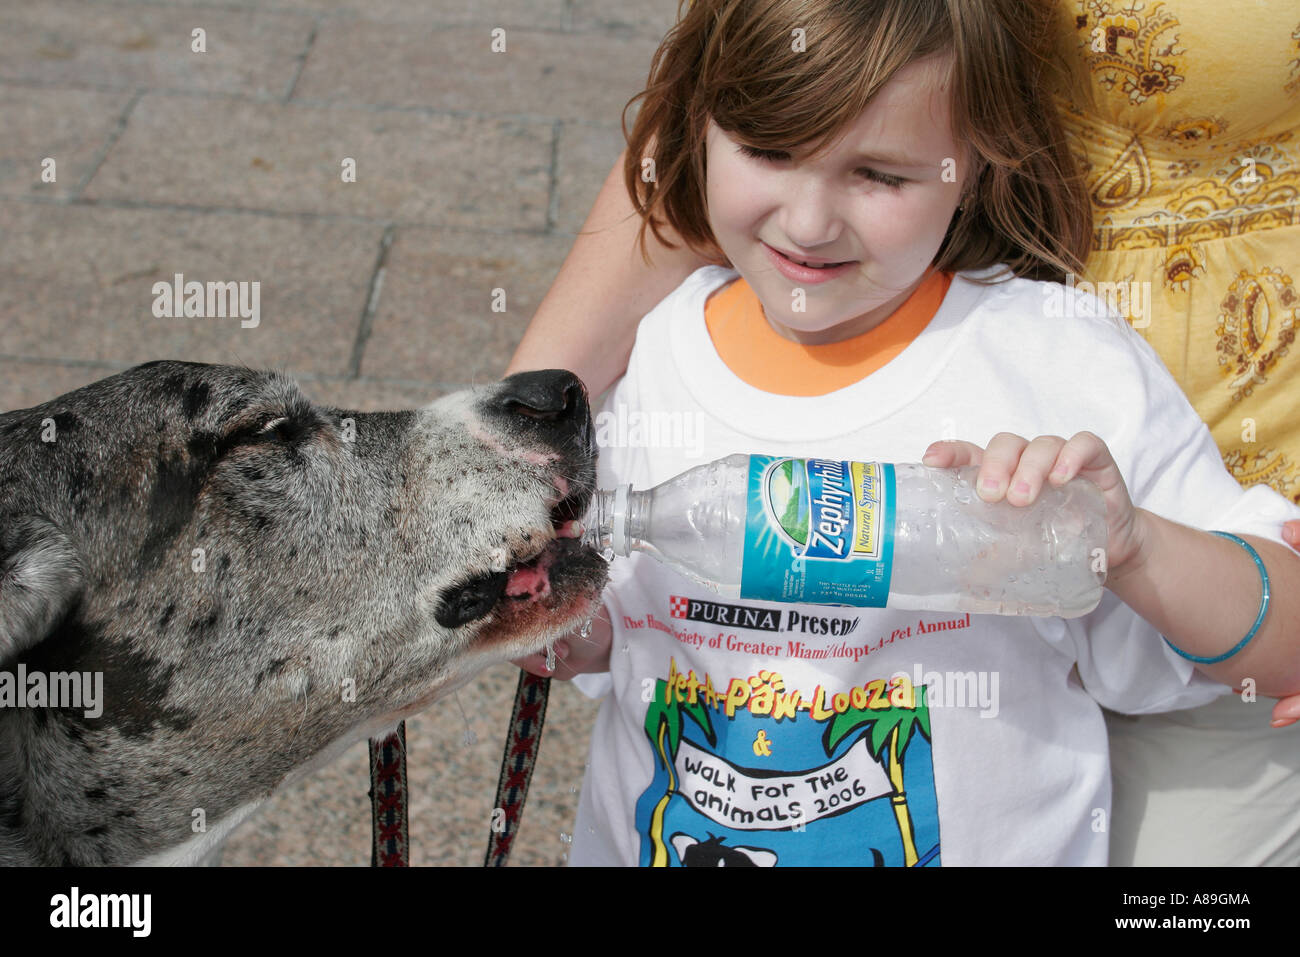 Miami Florida,Bayfront Park,Walk for the Animals,Humane Society,girl girls,youngster youngsters youth youths female kid kids child children,great Dane Stock Photo